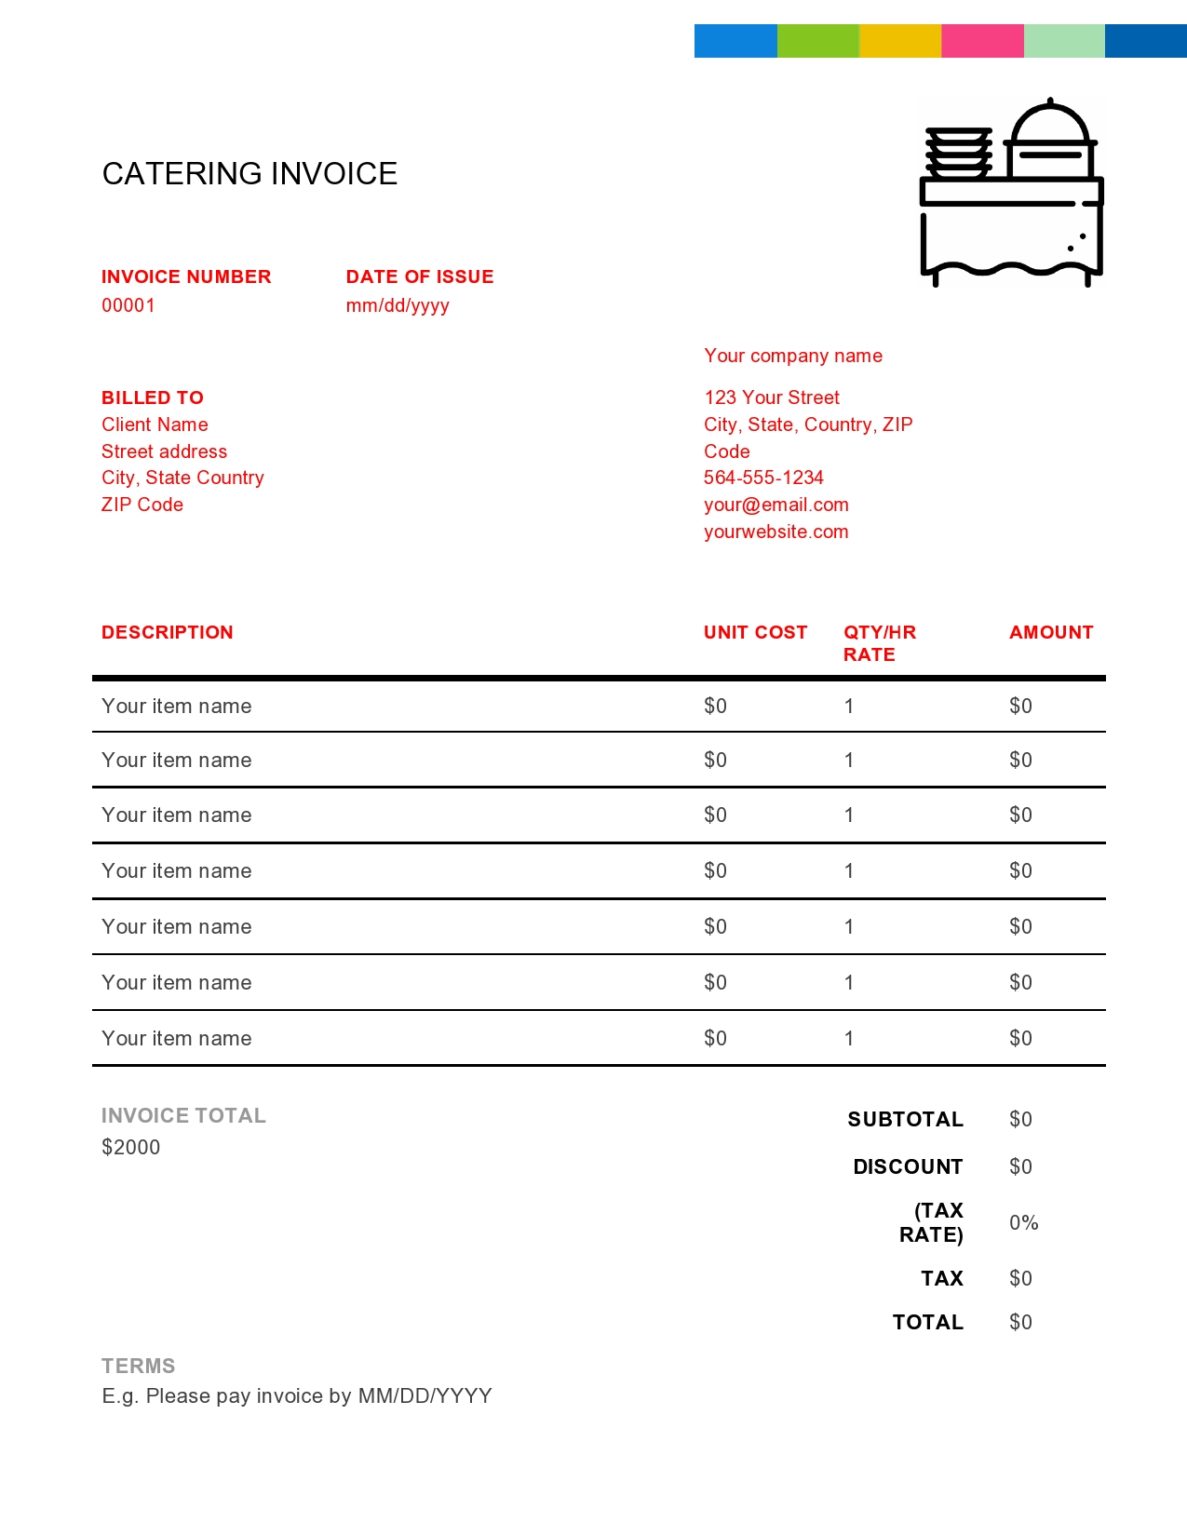 sample invoices for catering services